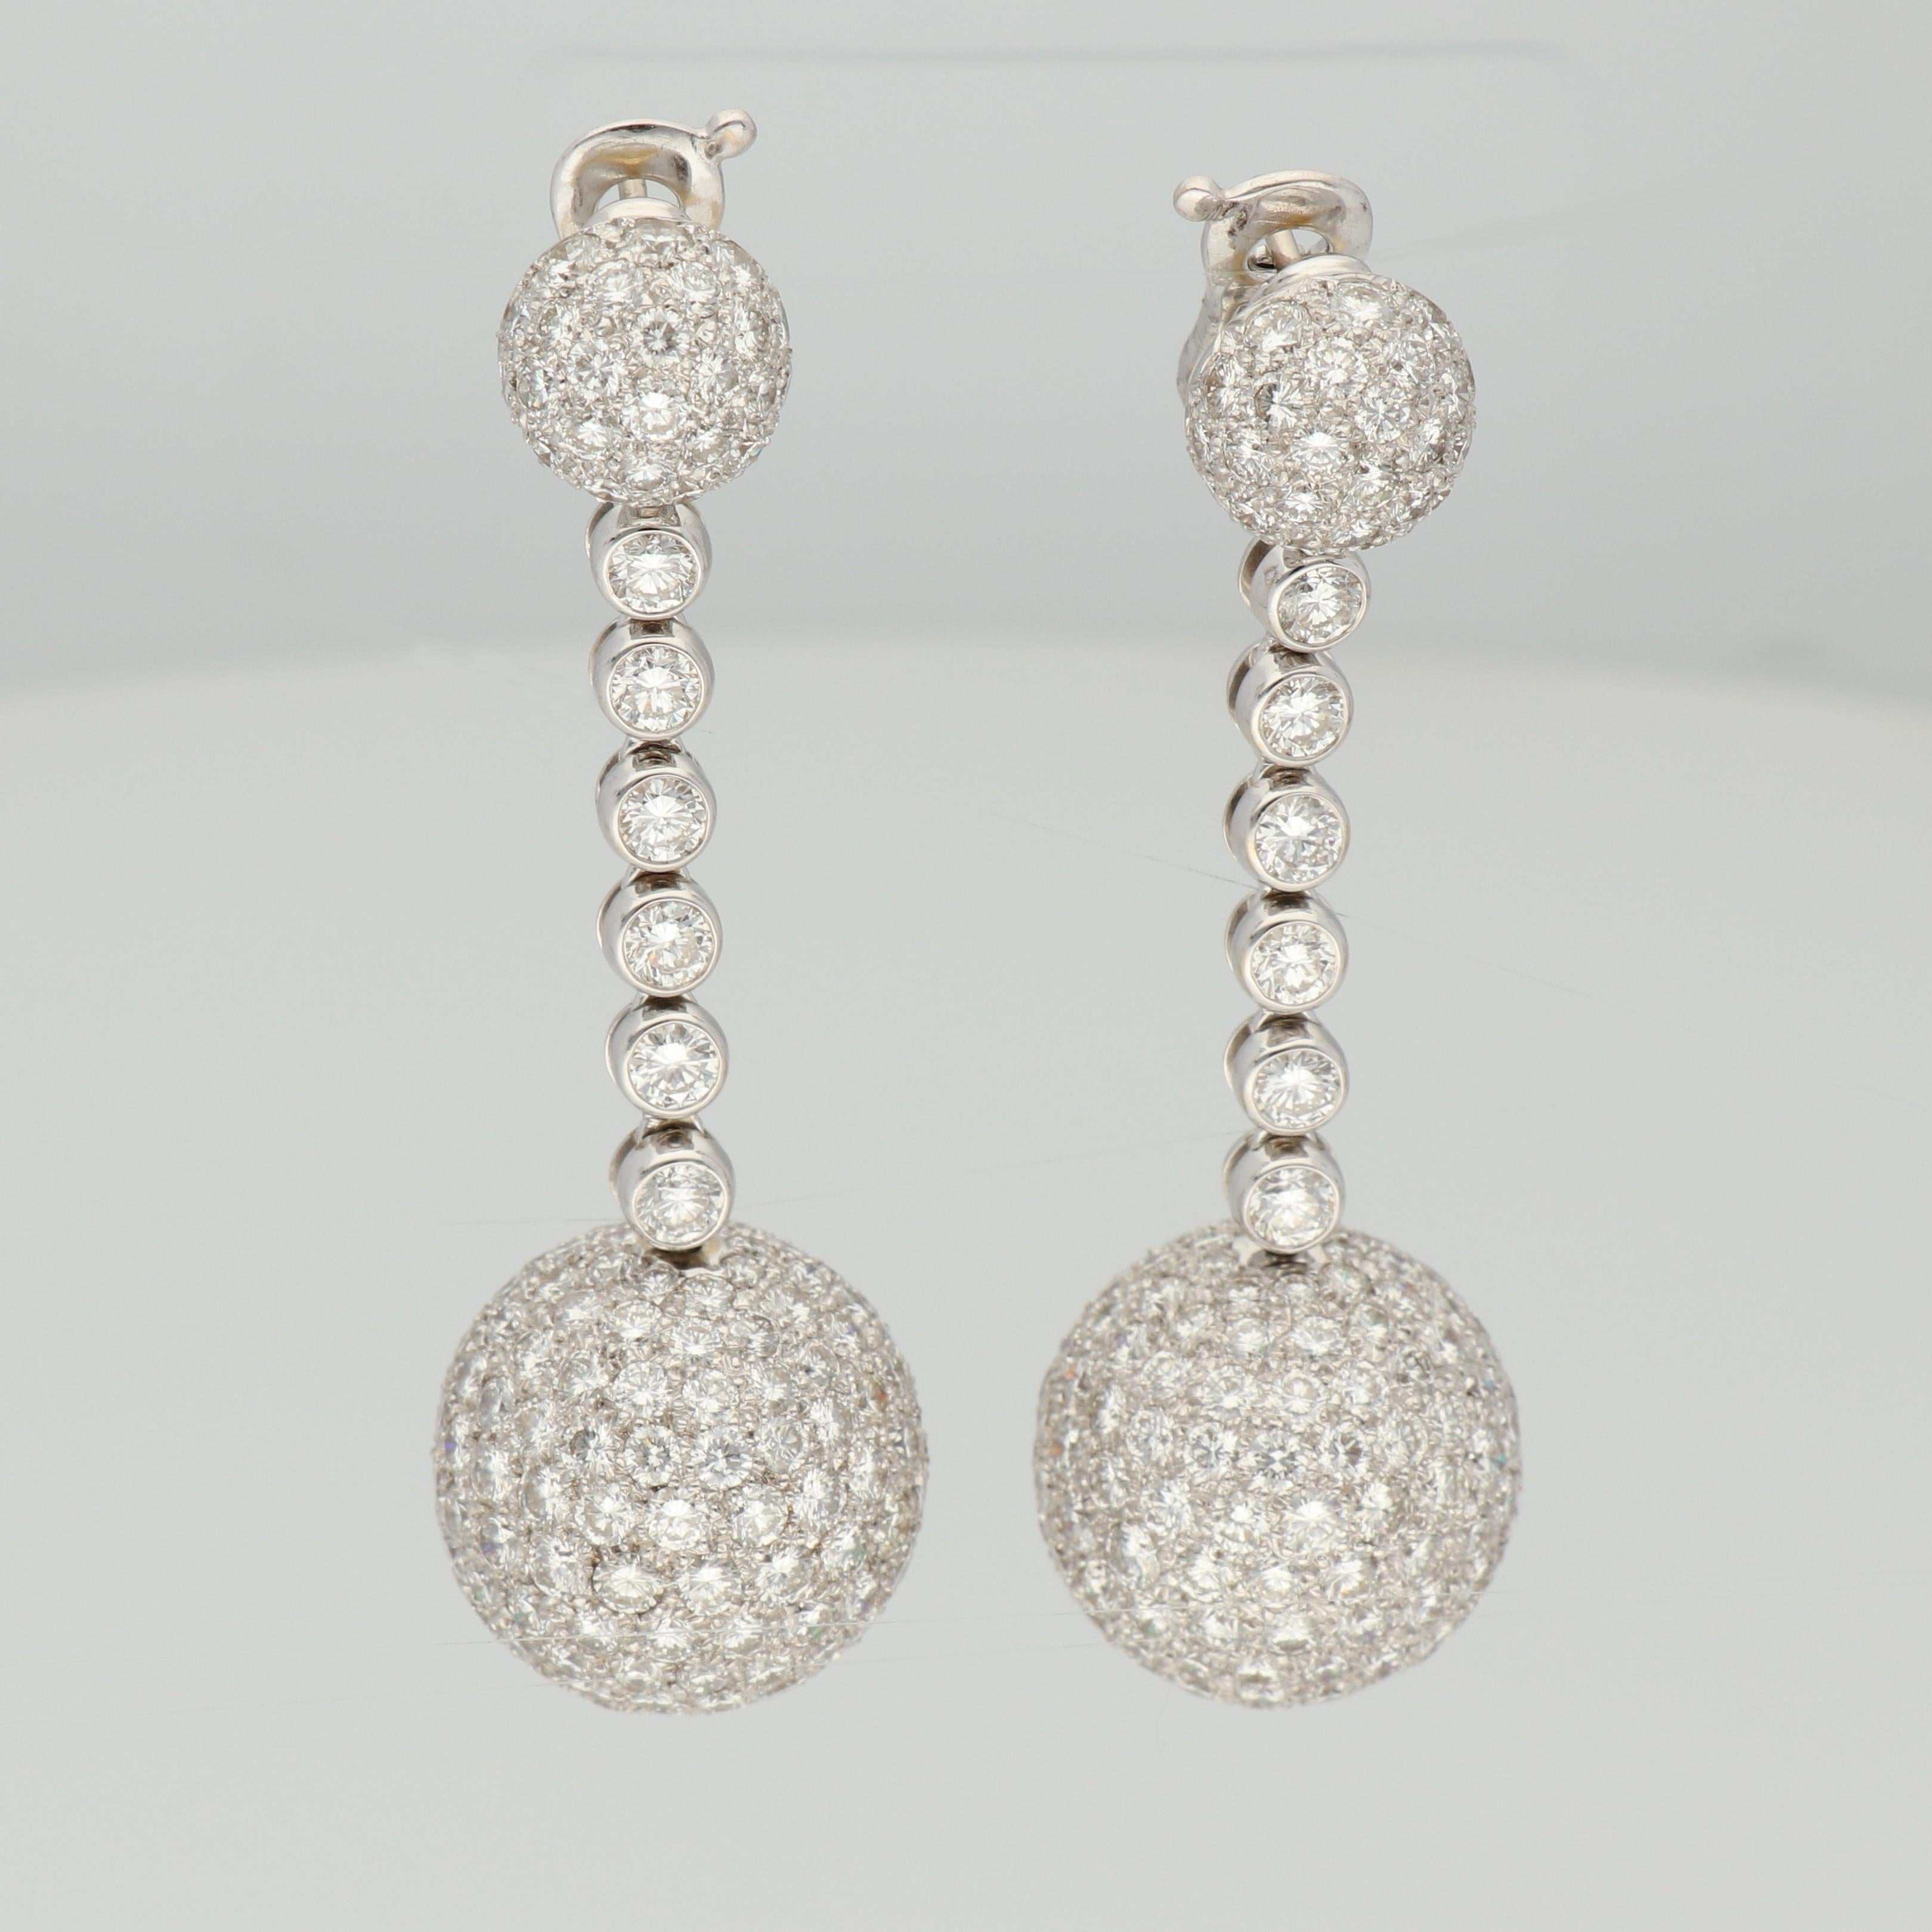 A pair of 18K white gold ball-shaped pendant earrings, set with 27.30 carats of round-cut white diamonds. 

Inspired by the limelight and glamour of jet-set parties, BOULE is the brightest and most iconic expression of de GRISOGONO jewellery